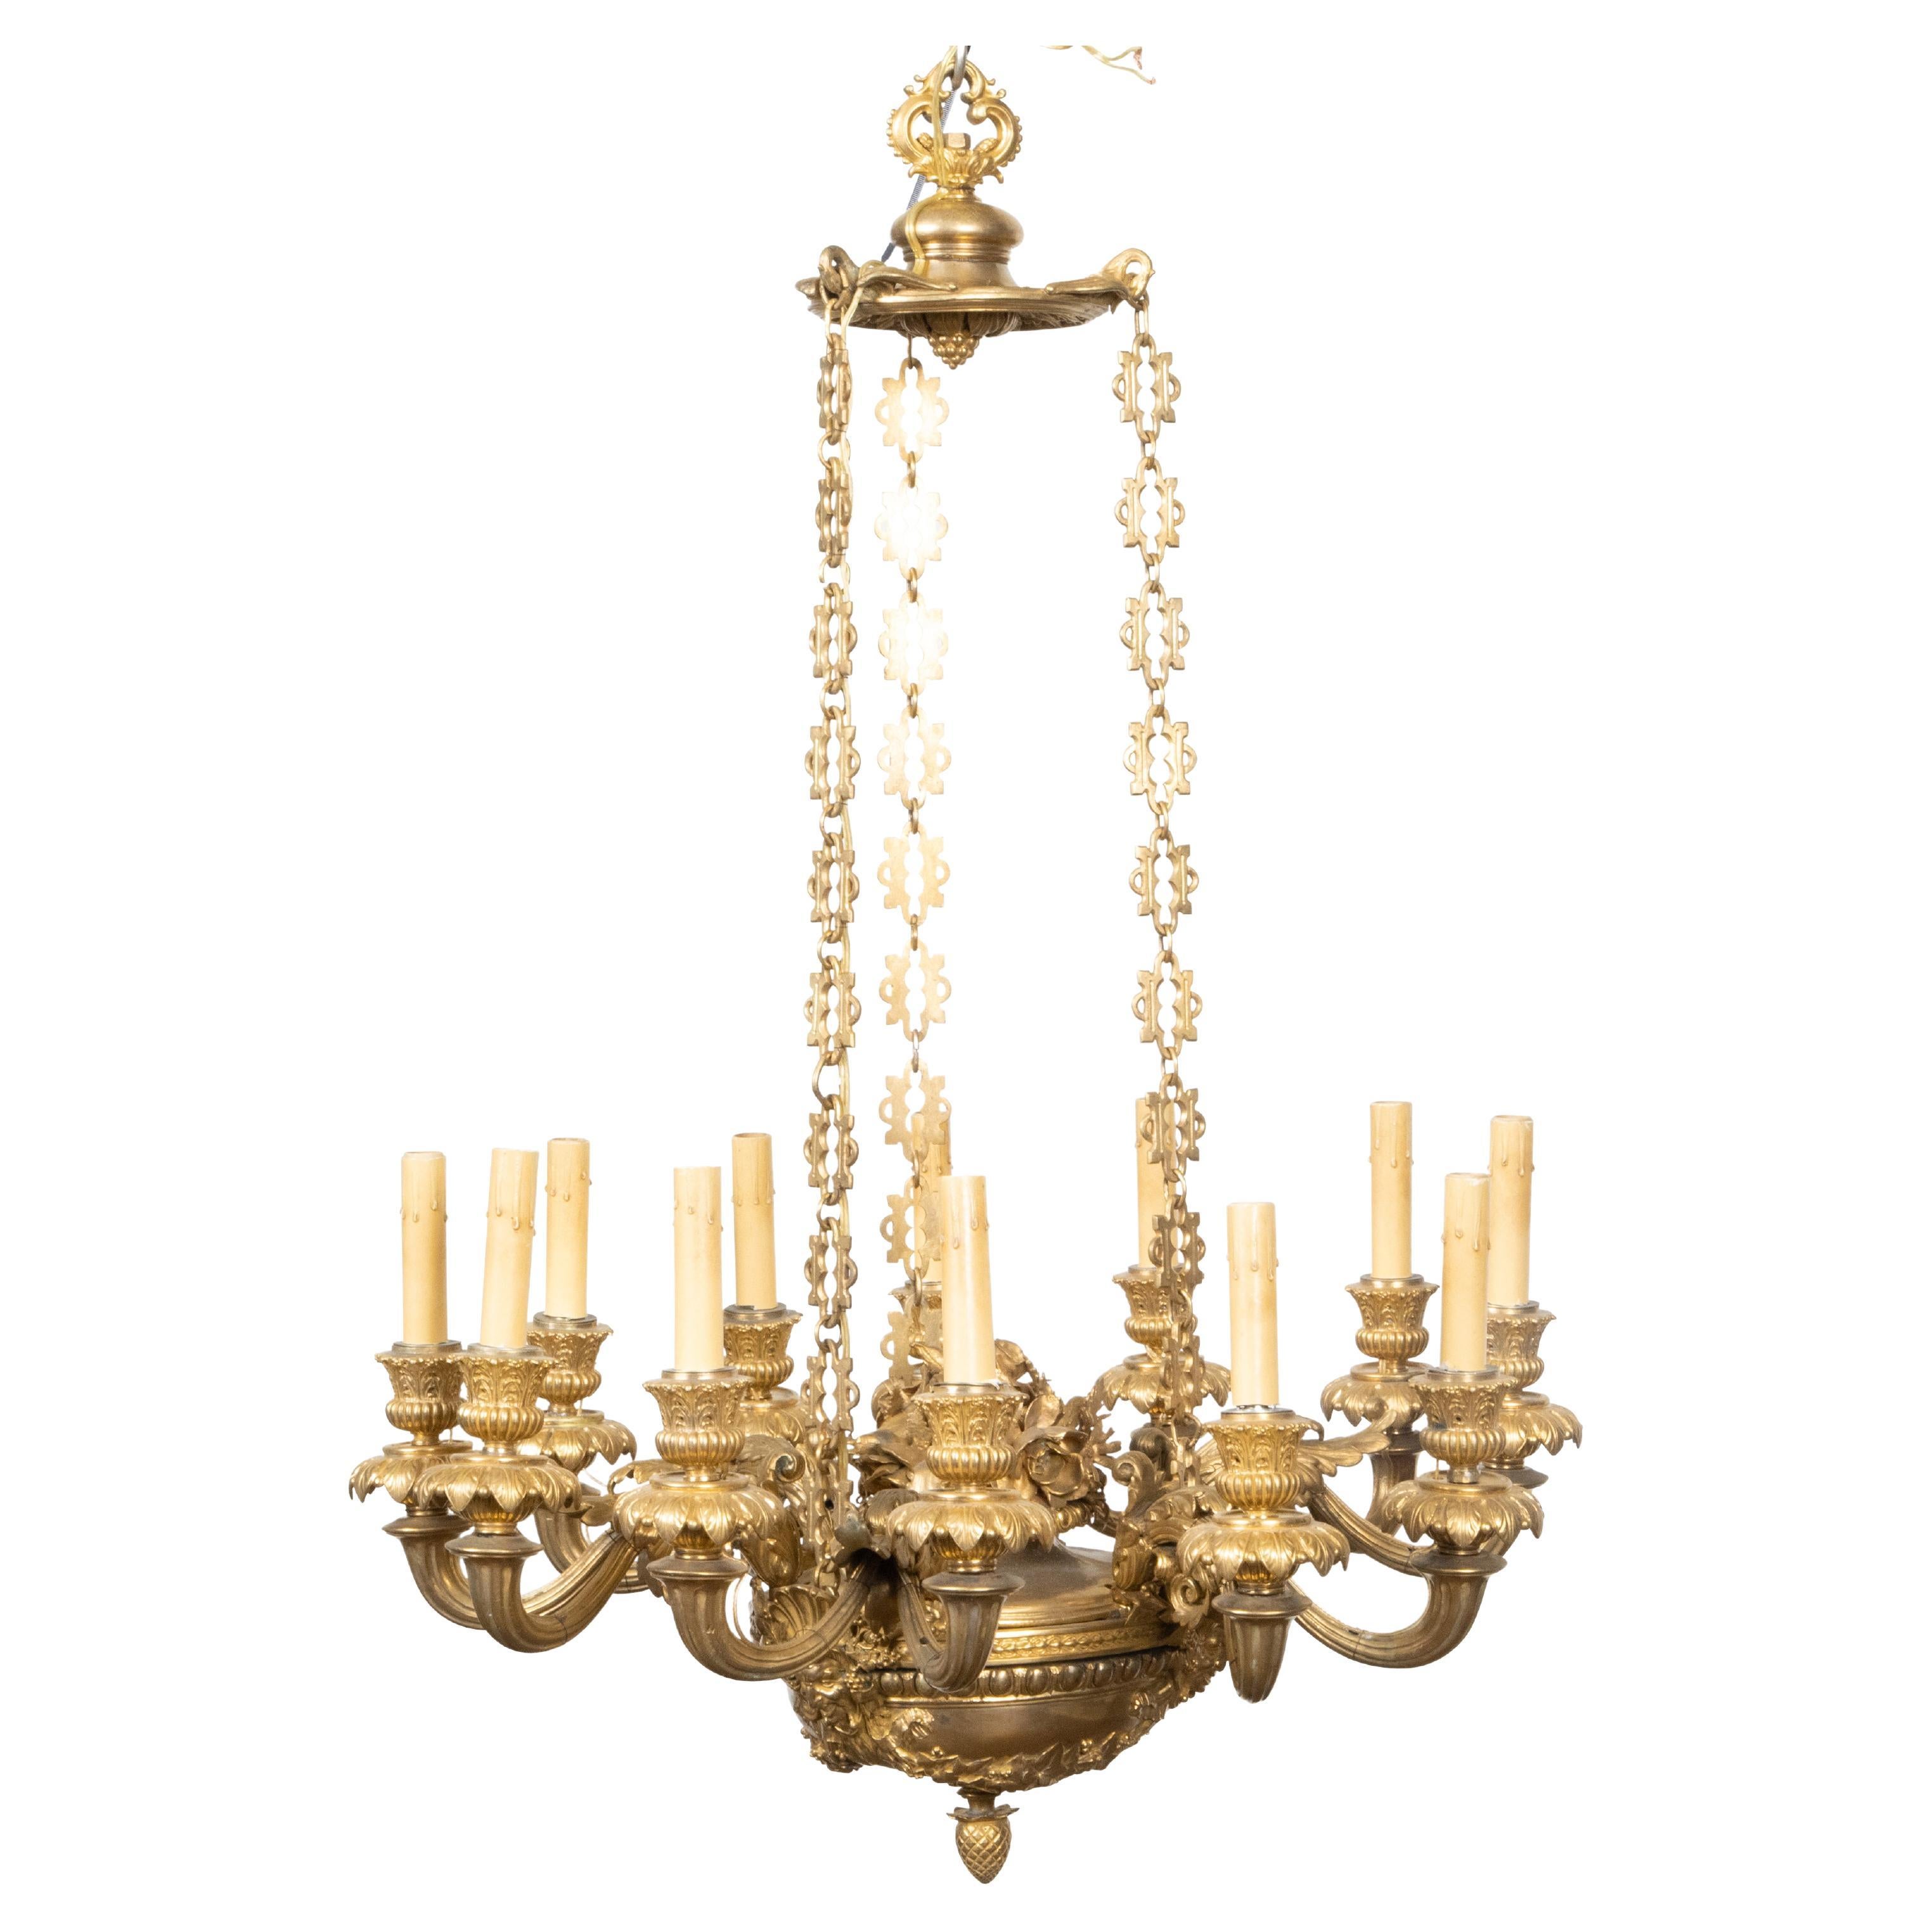 French Napoléon III 19th Century Gilt Bronze 12 Light Chandelier with Mascarons For Sale